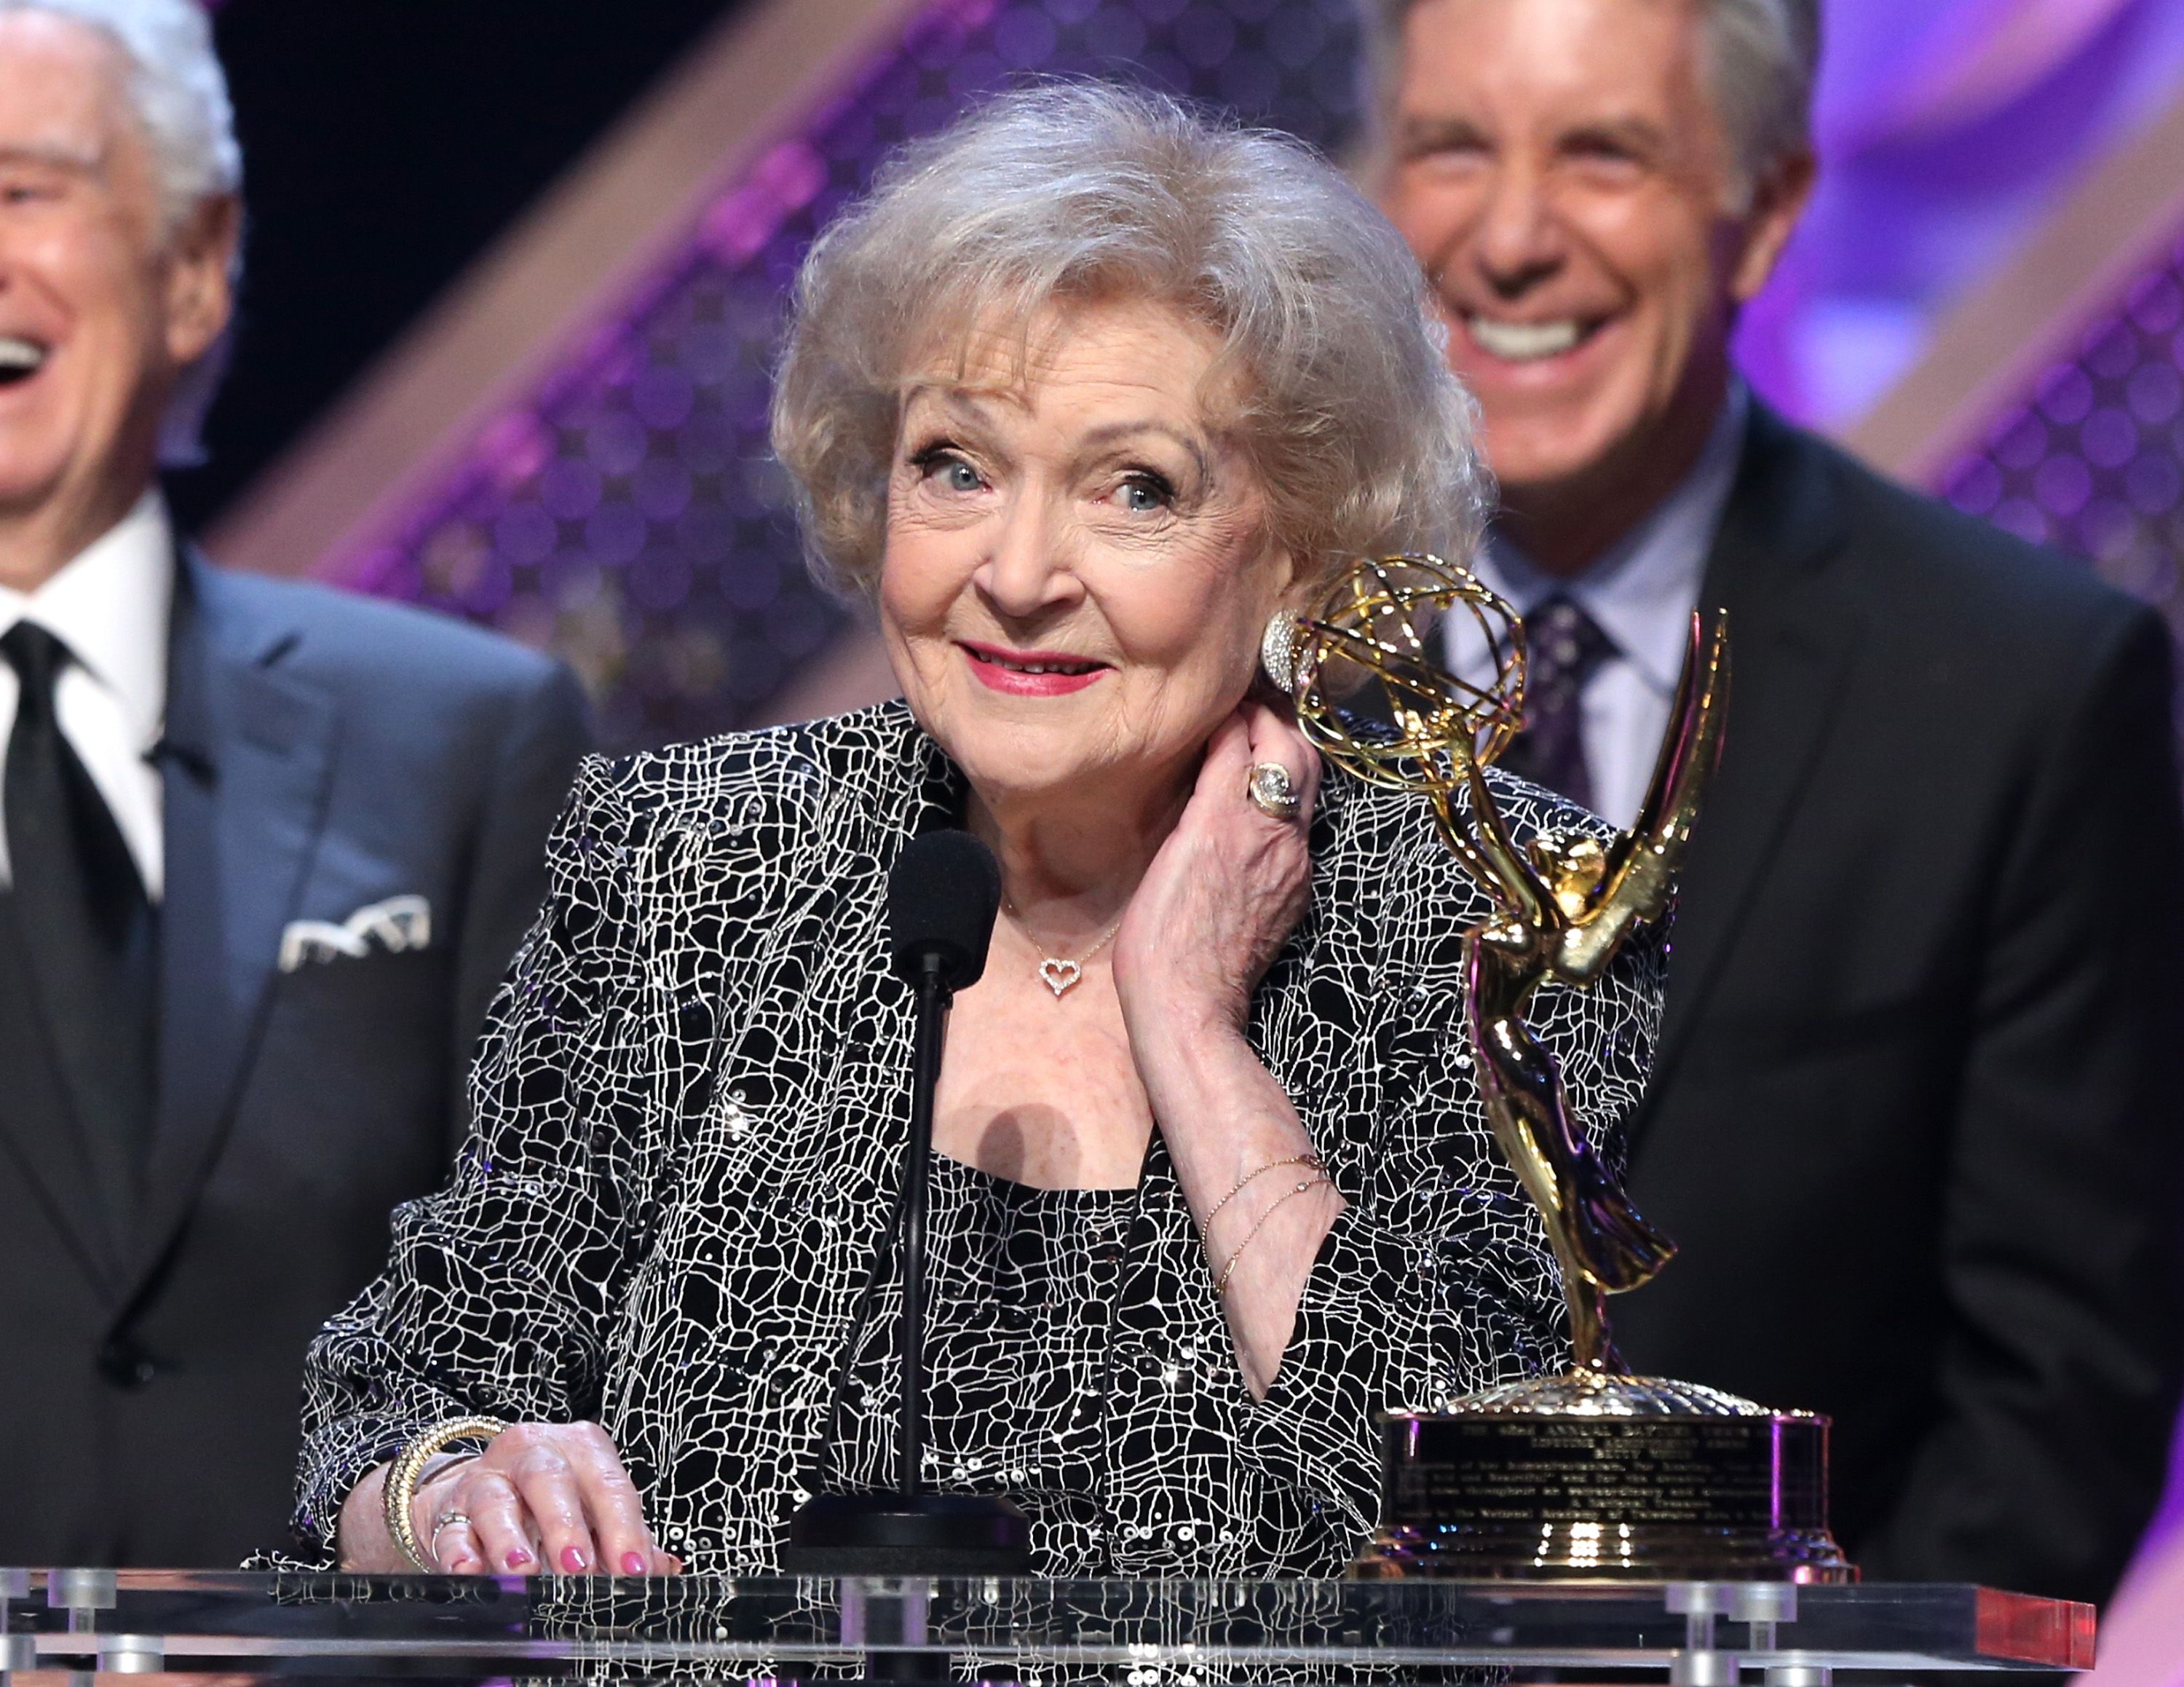 Betty White accepts Daytime Emmy Lifetime Achievement Award onstage at Warner Bros. Studios on April 26, 2015 | Photo: Getty Images